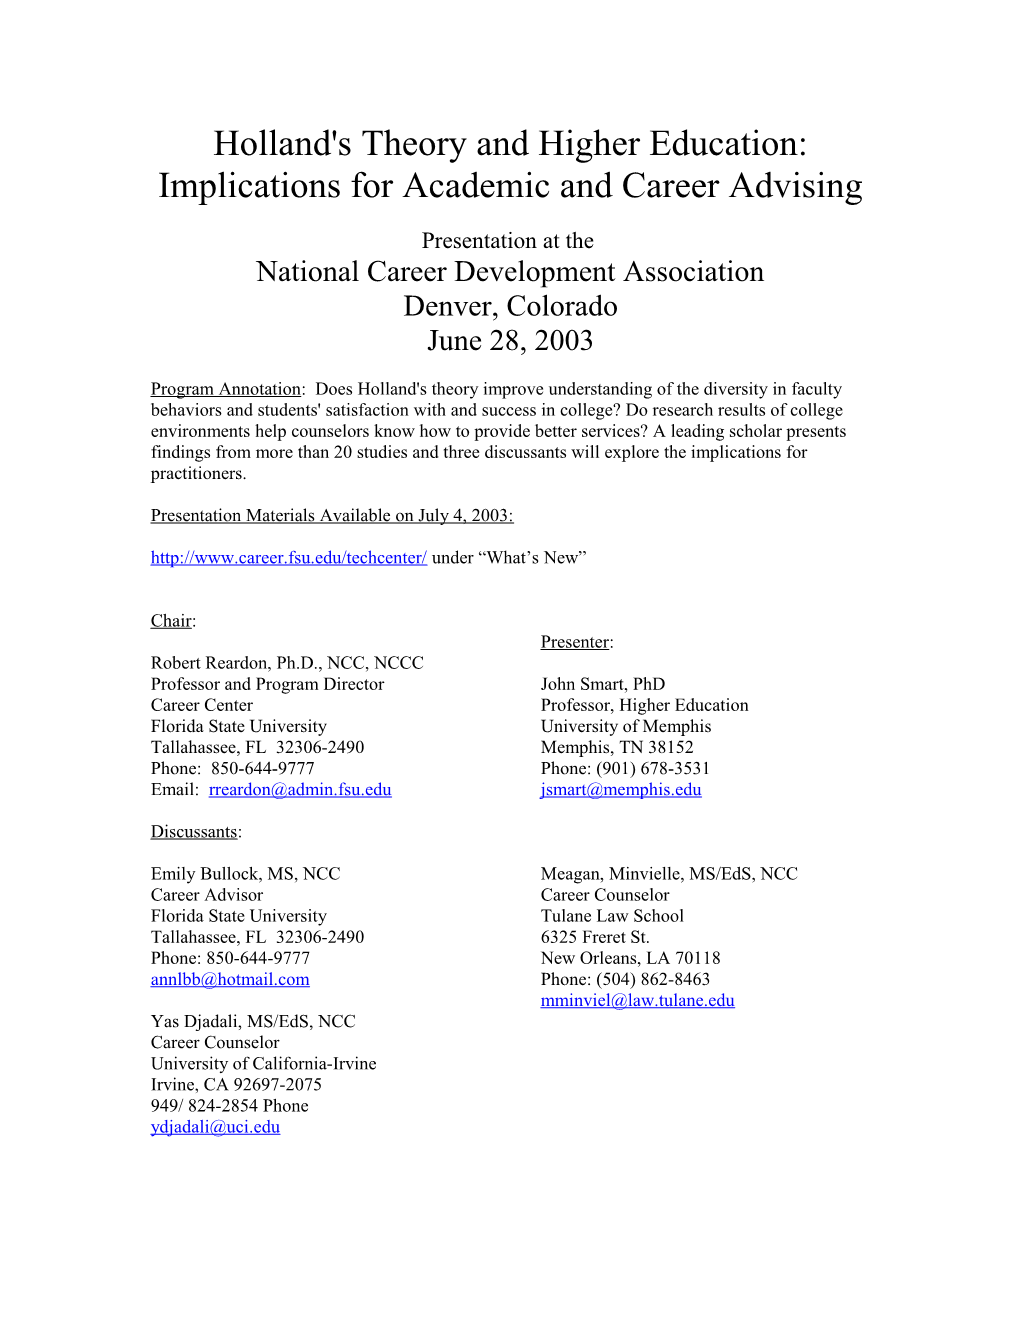 Holland's Theory and Higher Education: Implications for Academic and Career Advising